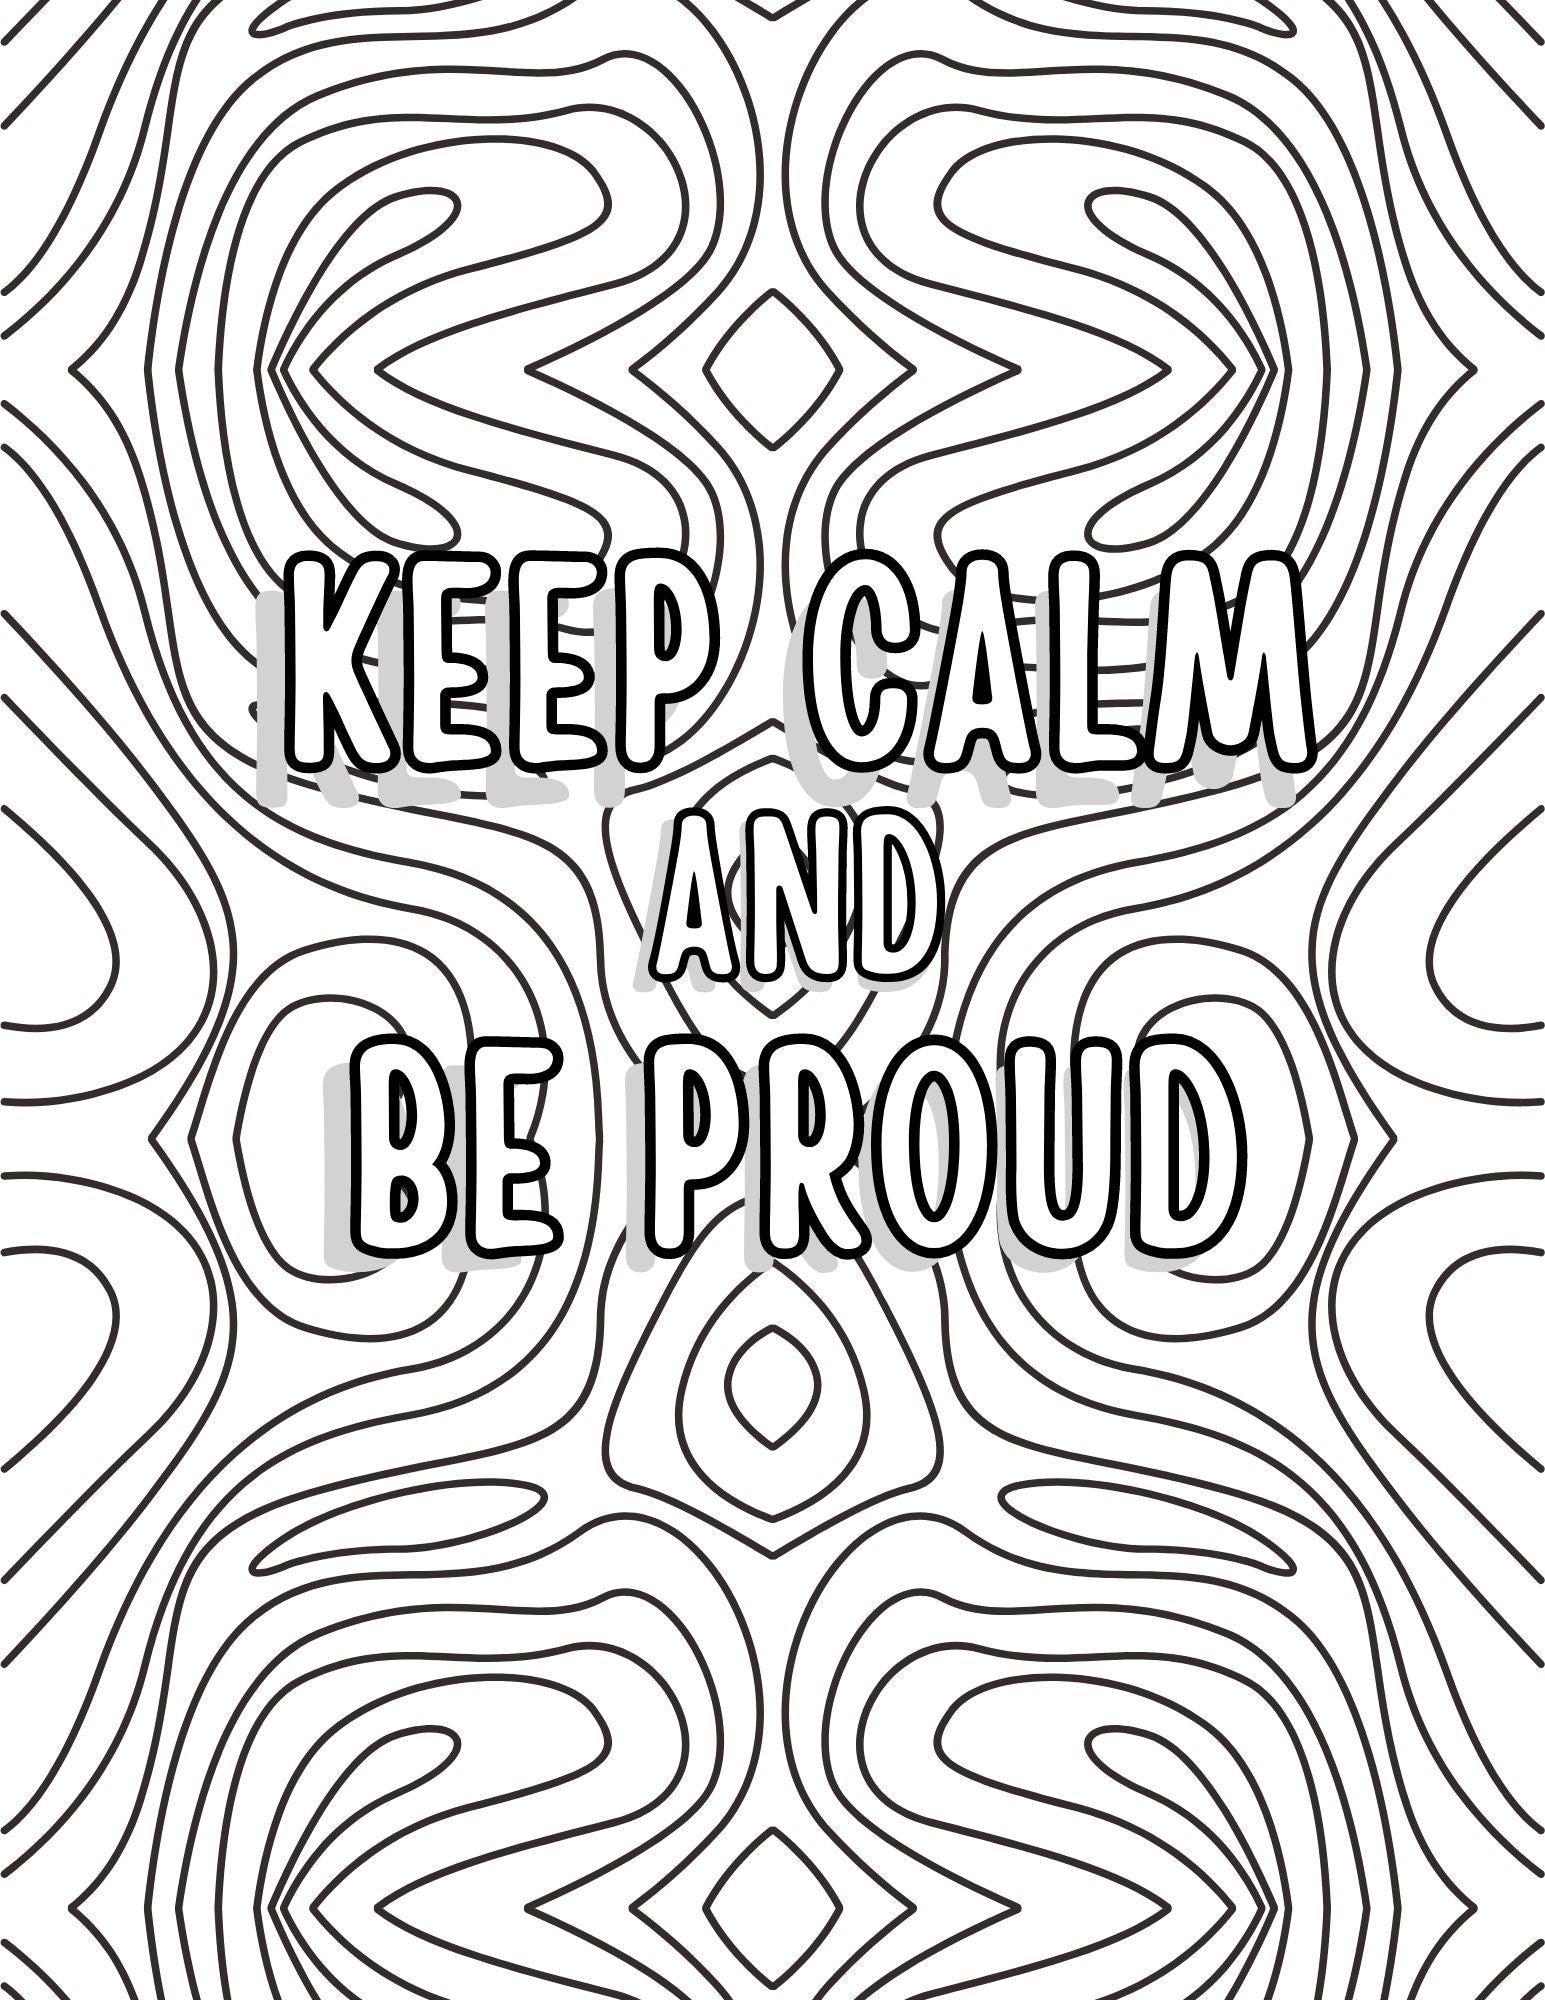 Celebrate pride coloring book pages to express your lgbtq pride